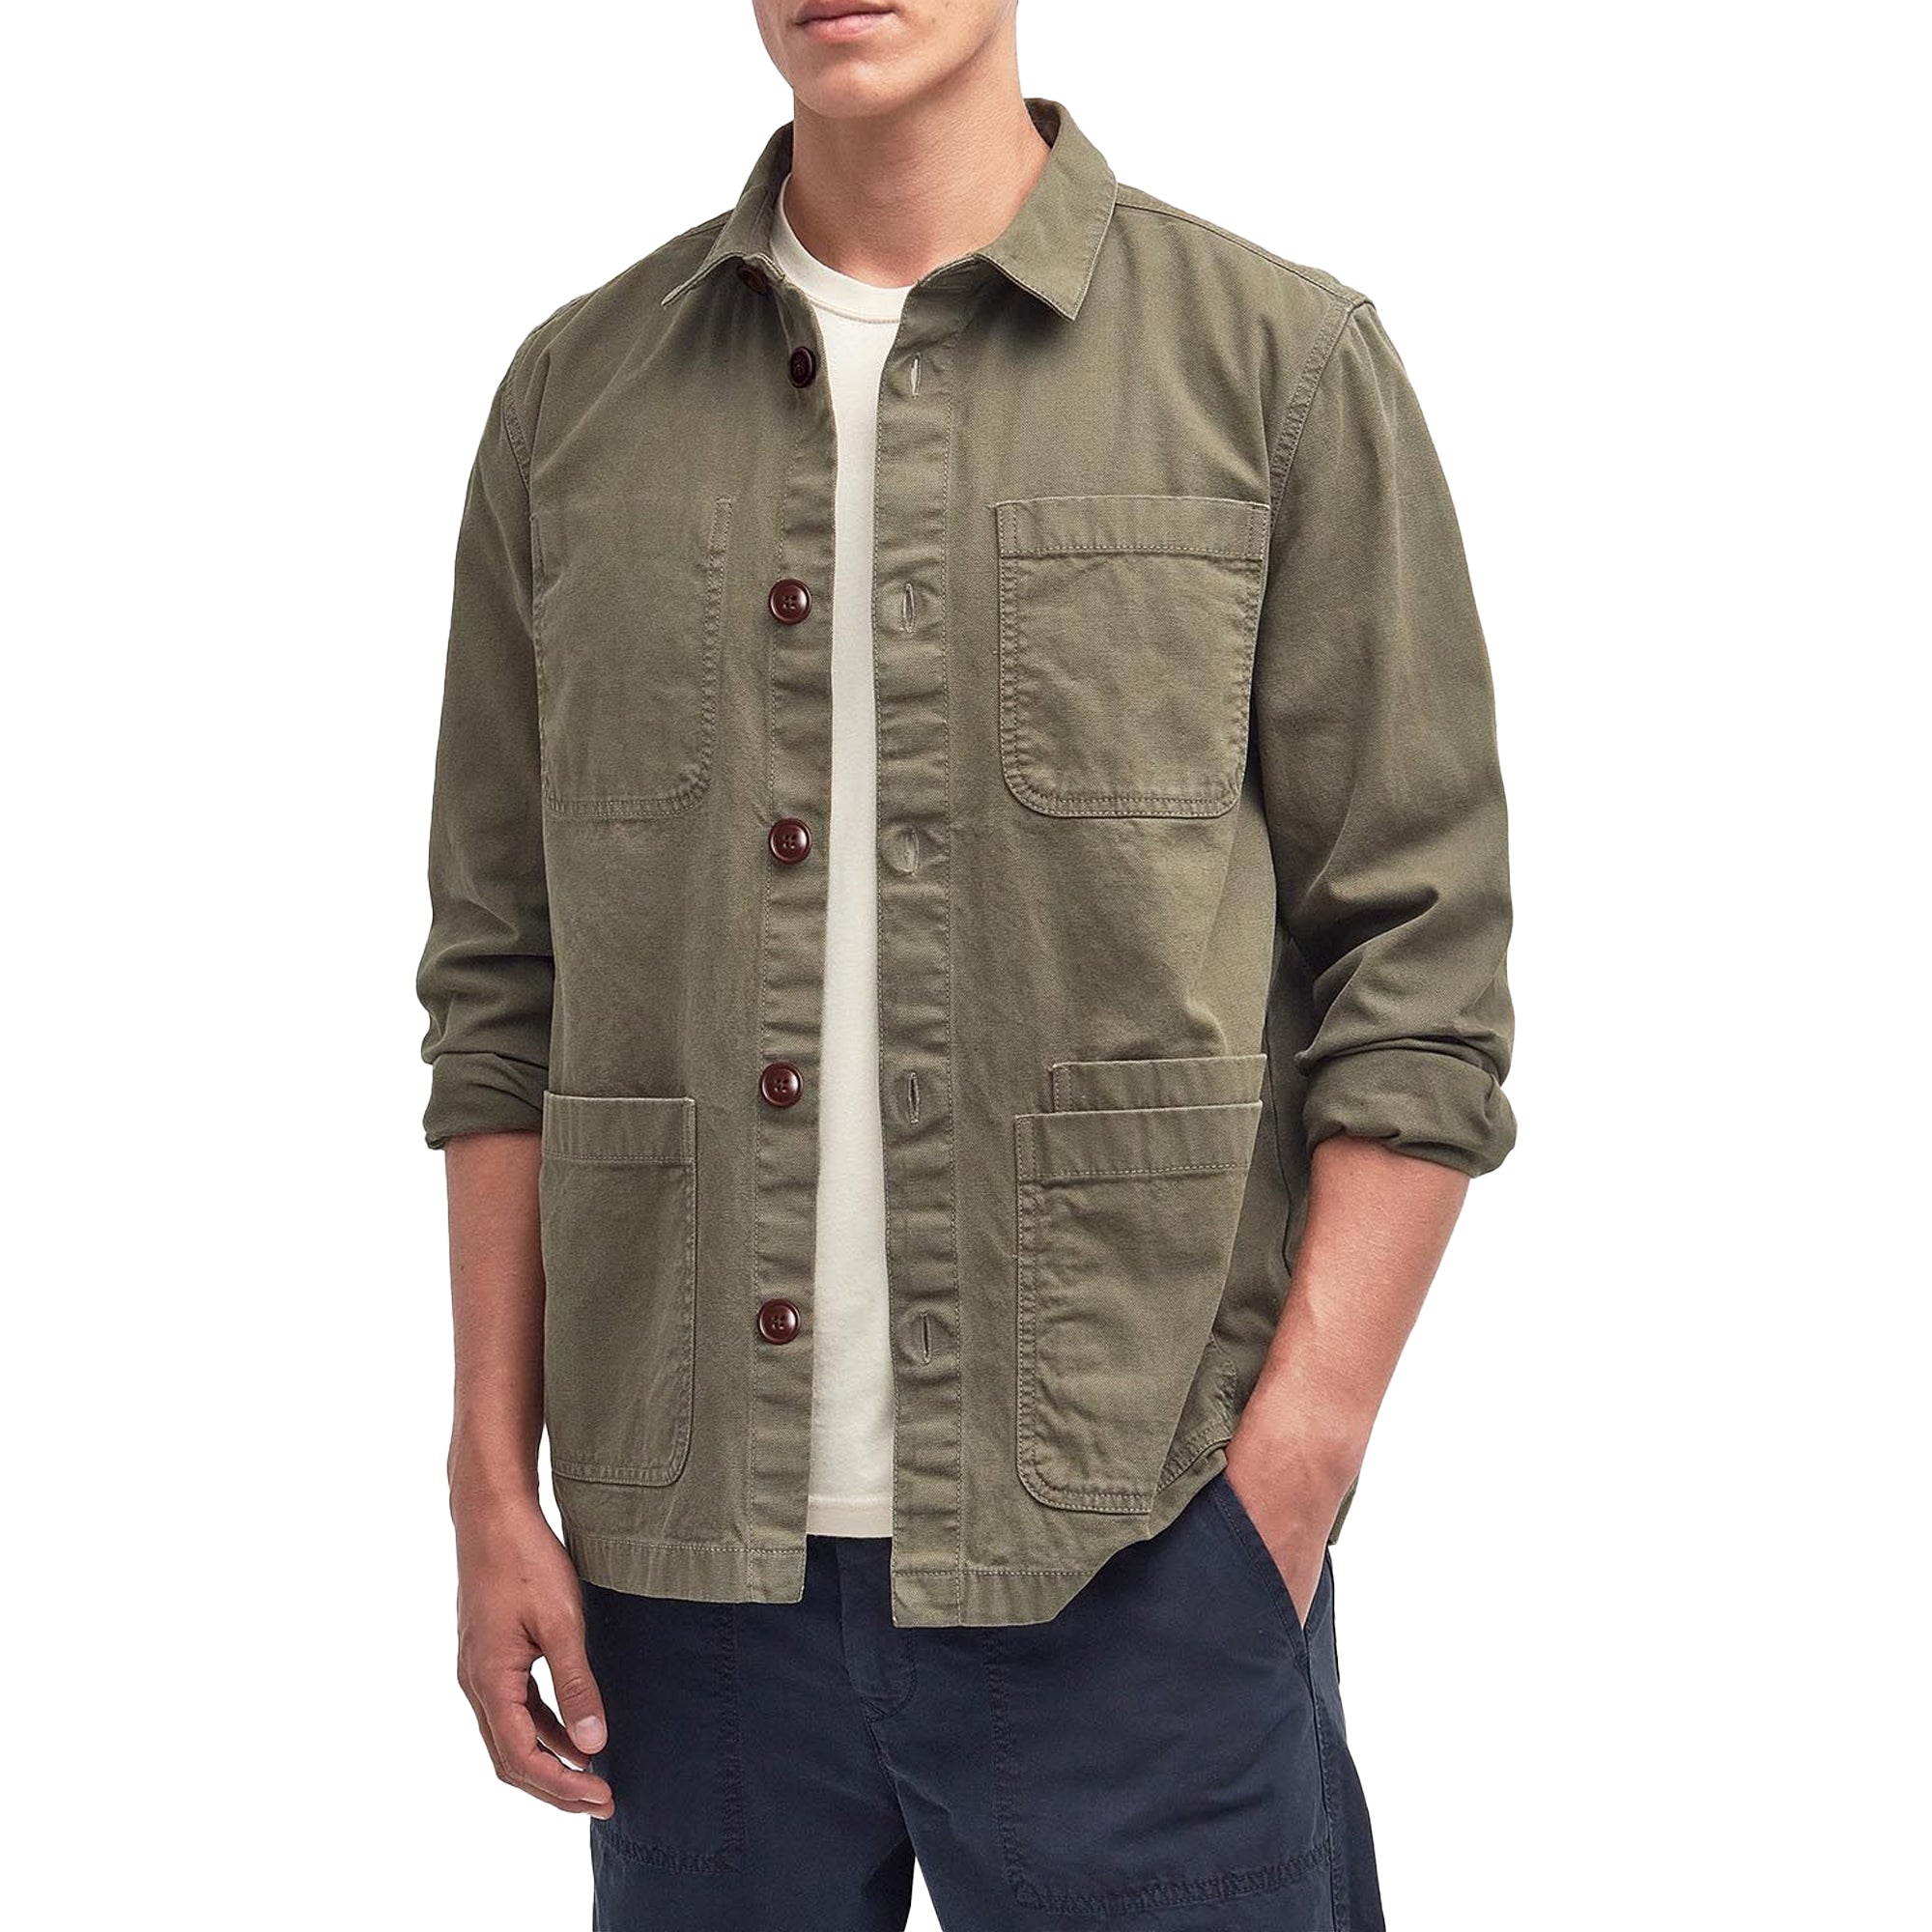 Barbour Chesterwood Overshirt - Pale Sage